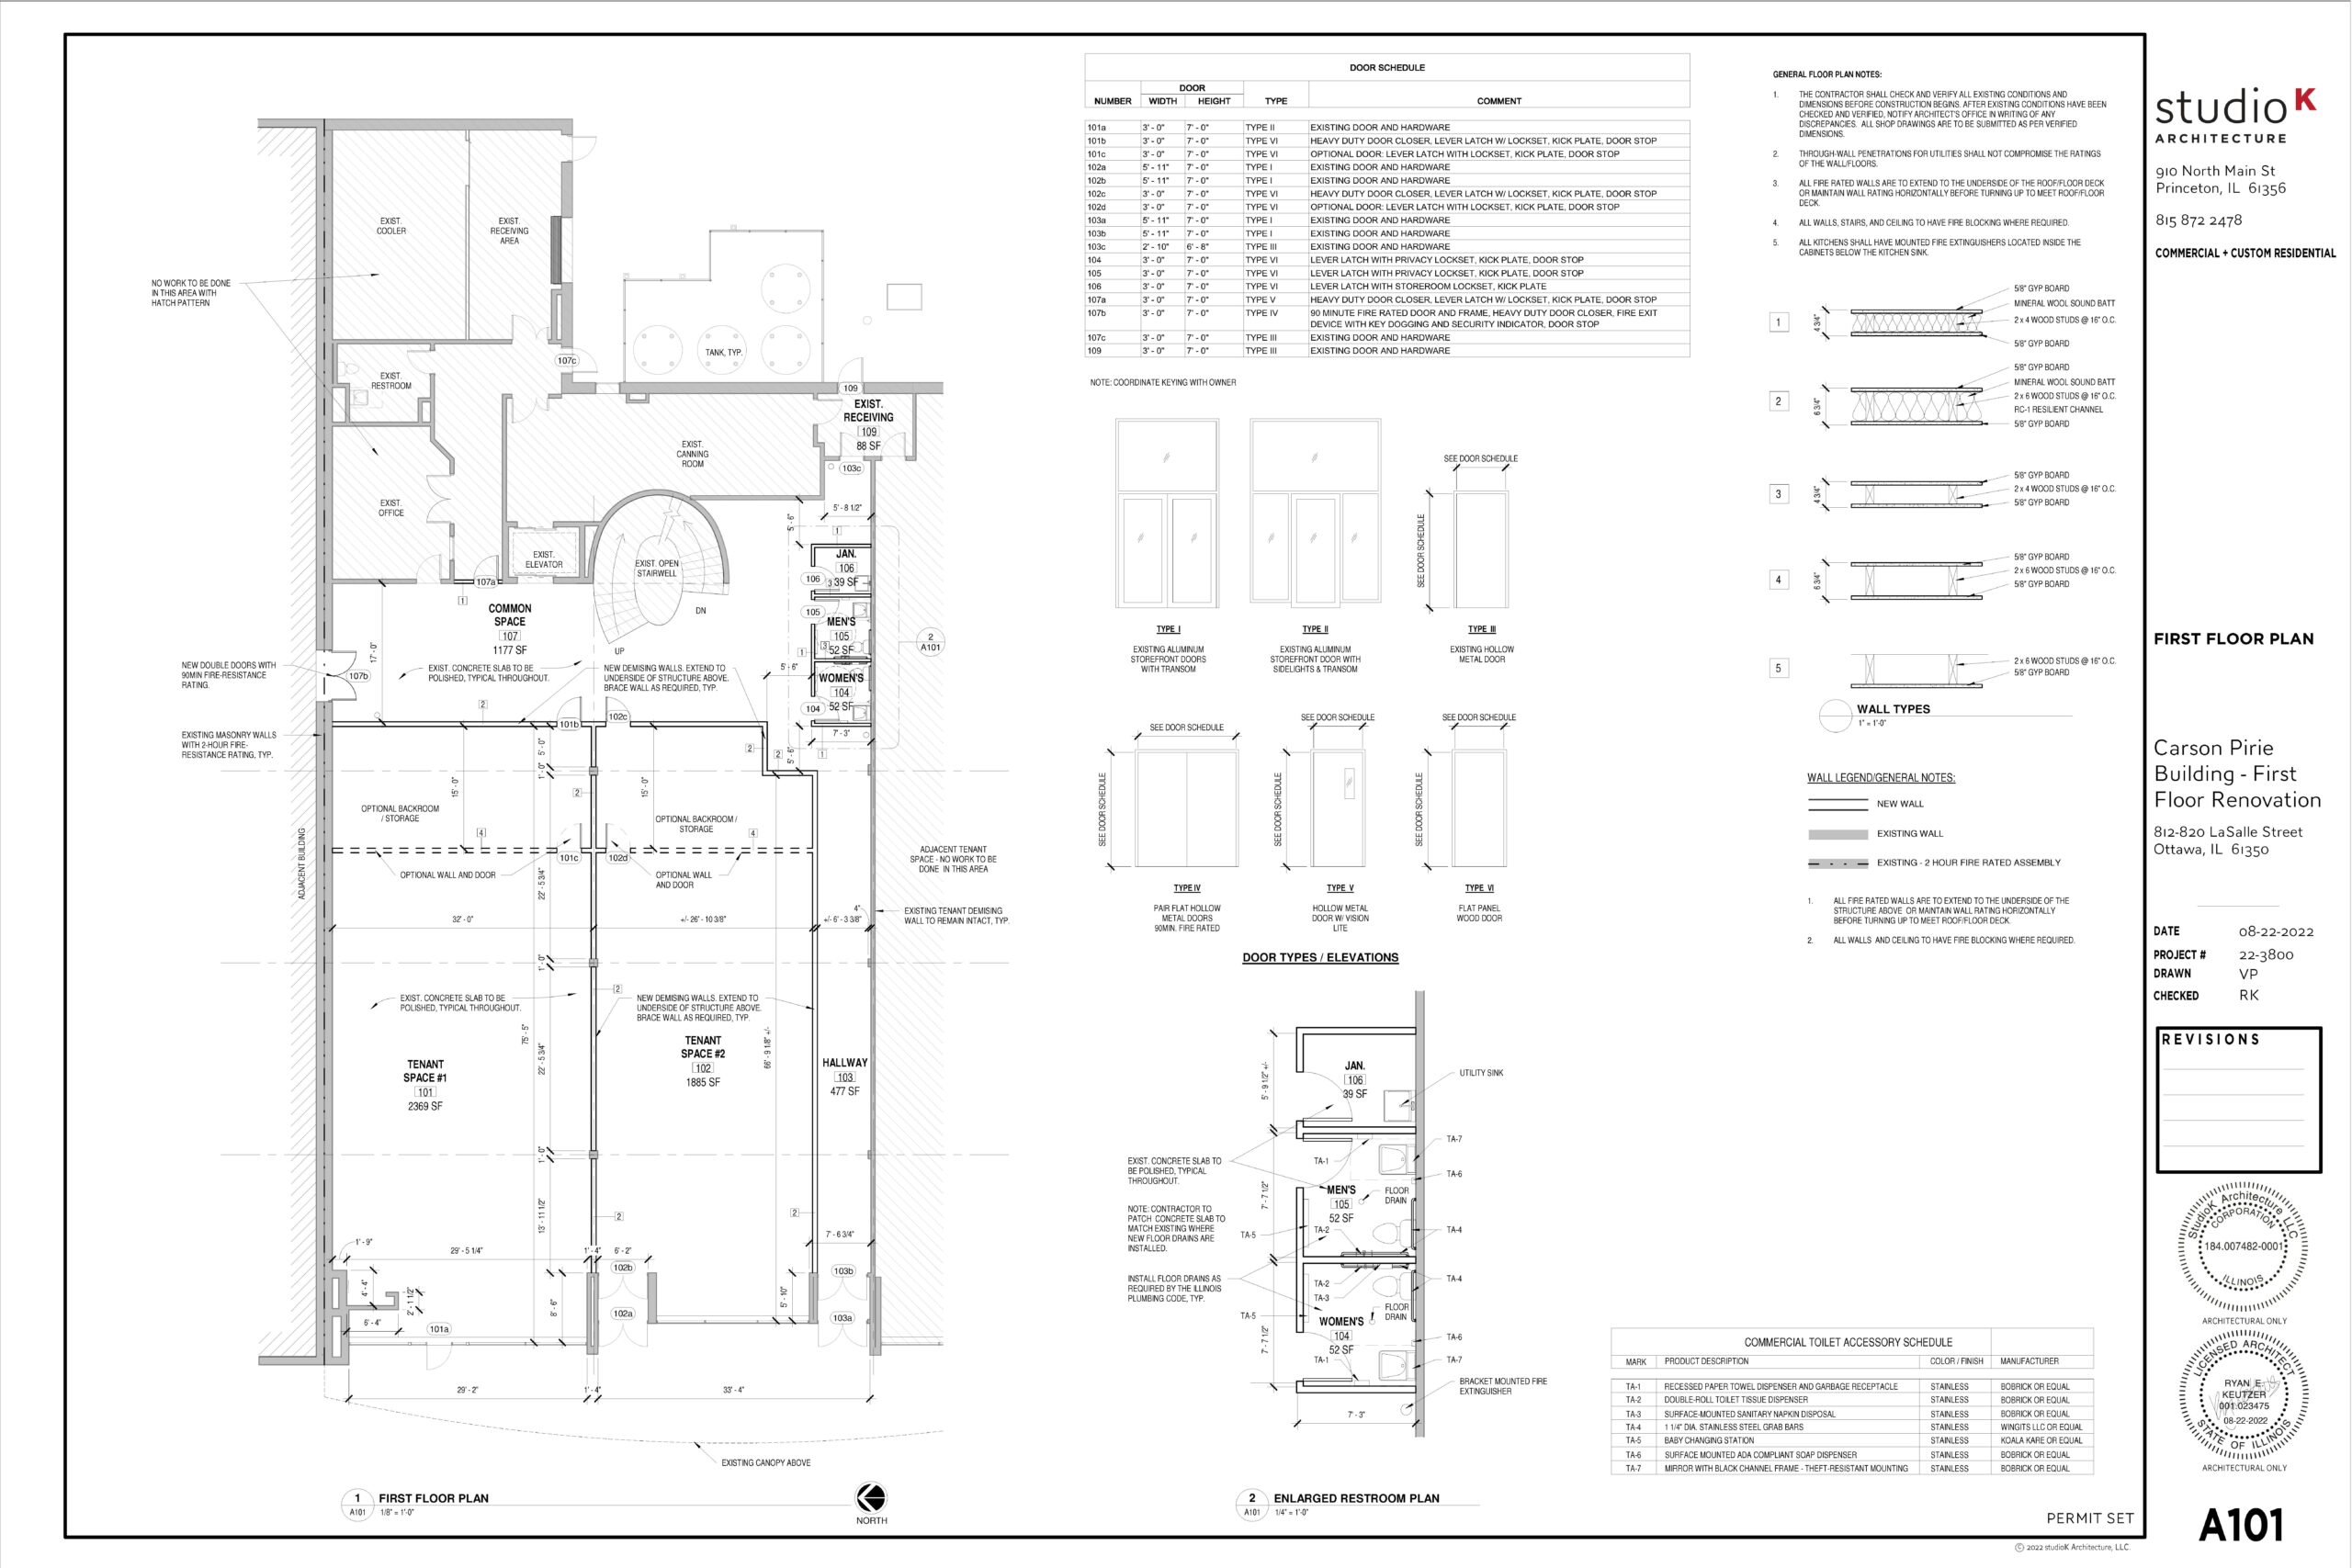 Floor plans of the storefront.